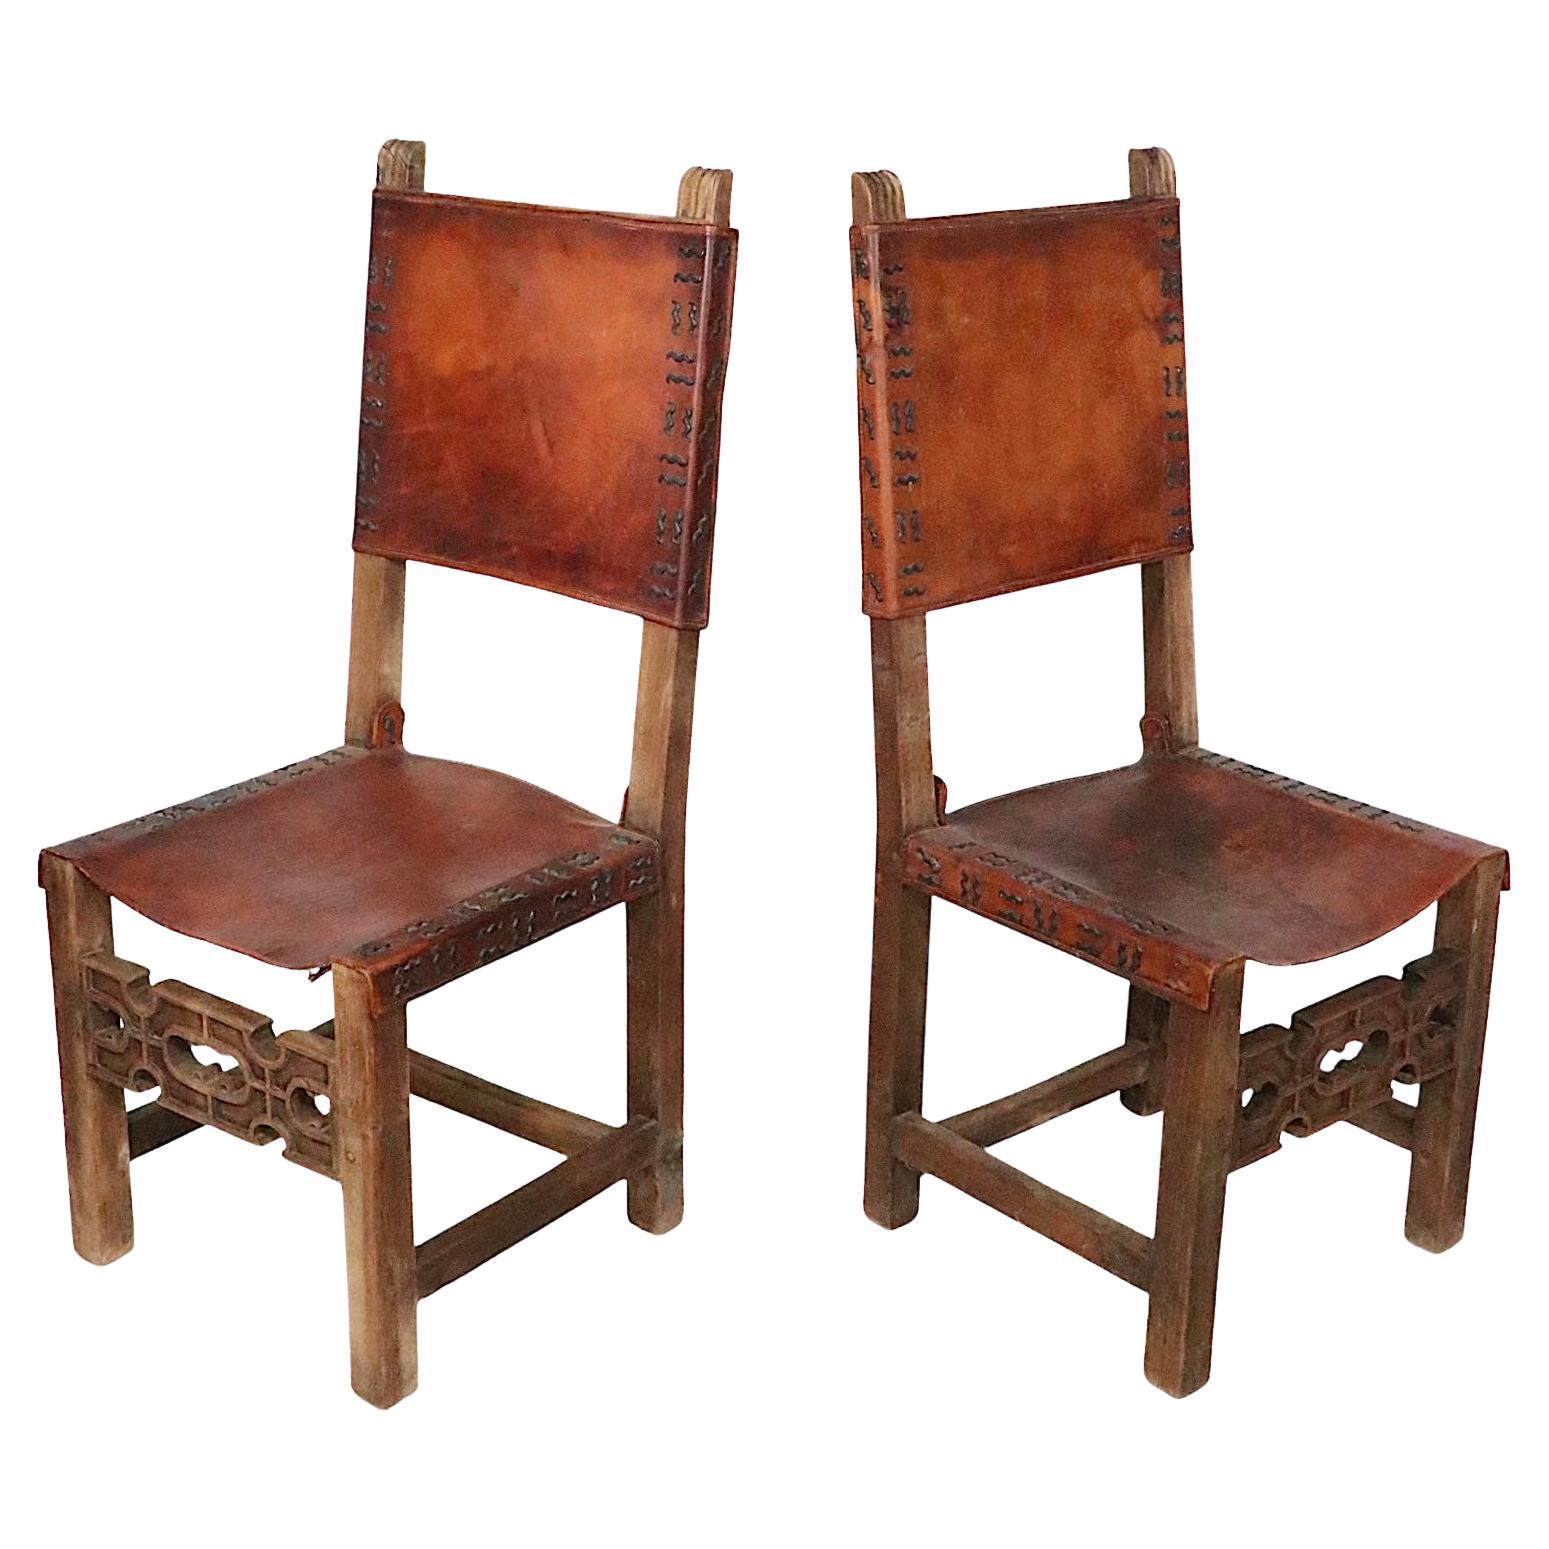 Antique Spanish Leather and Wood Dining Chairs